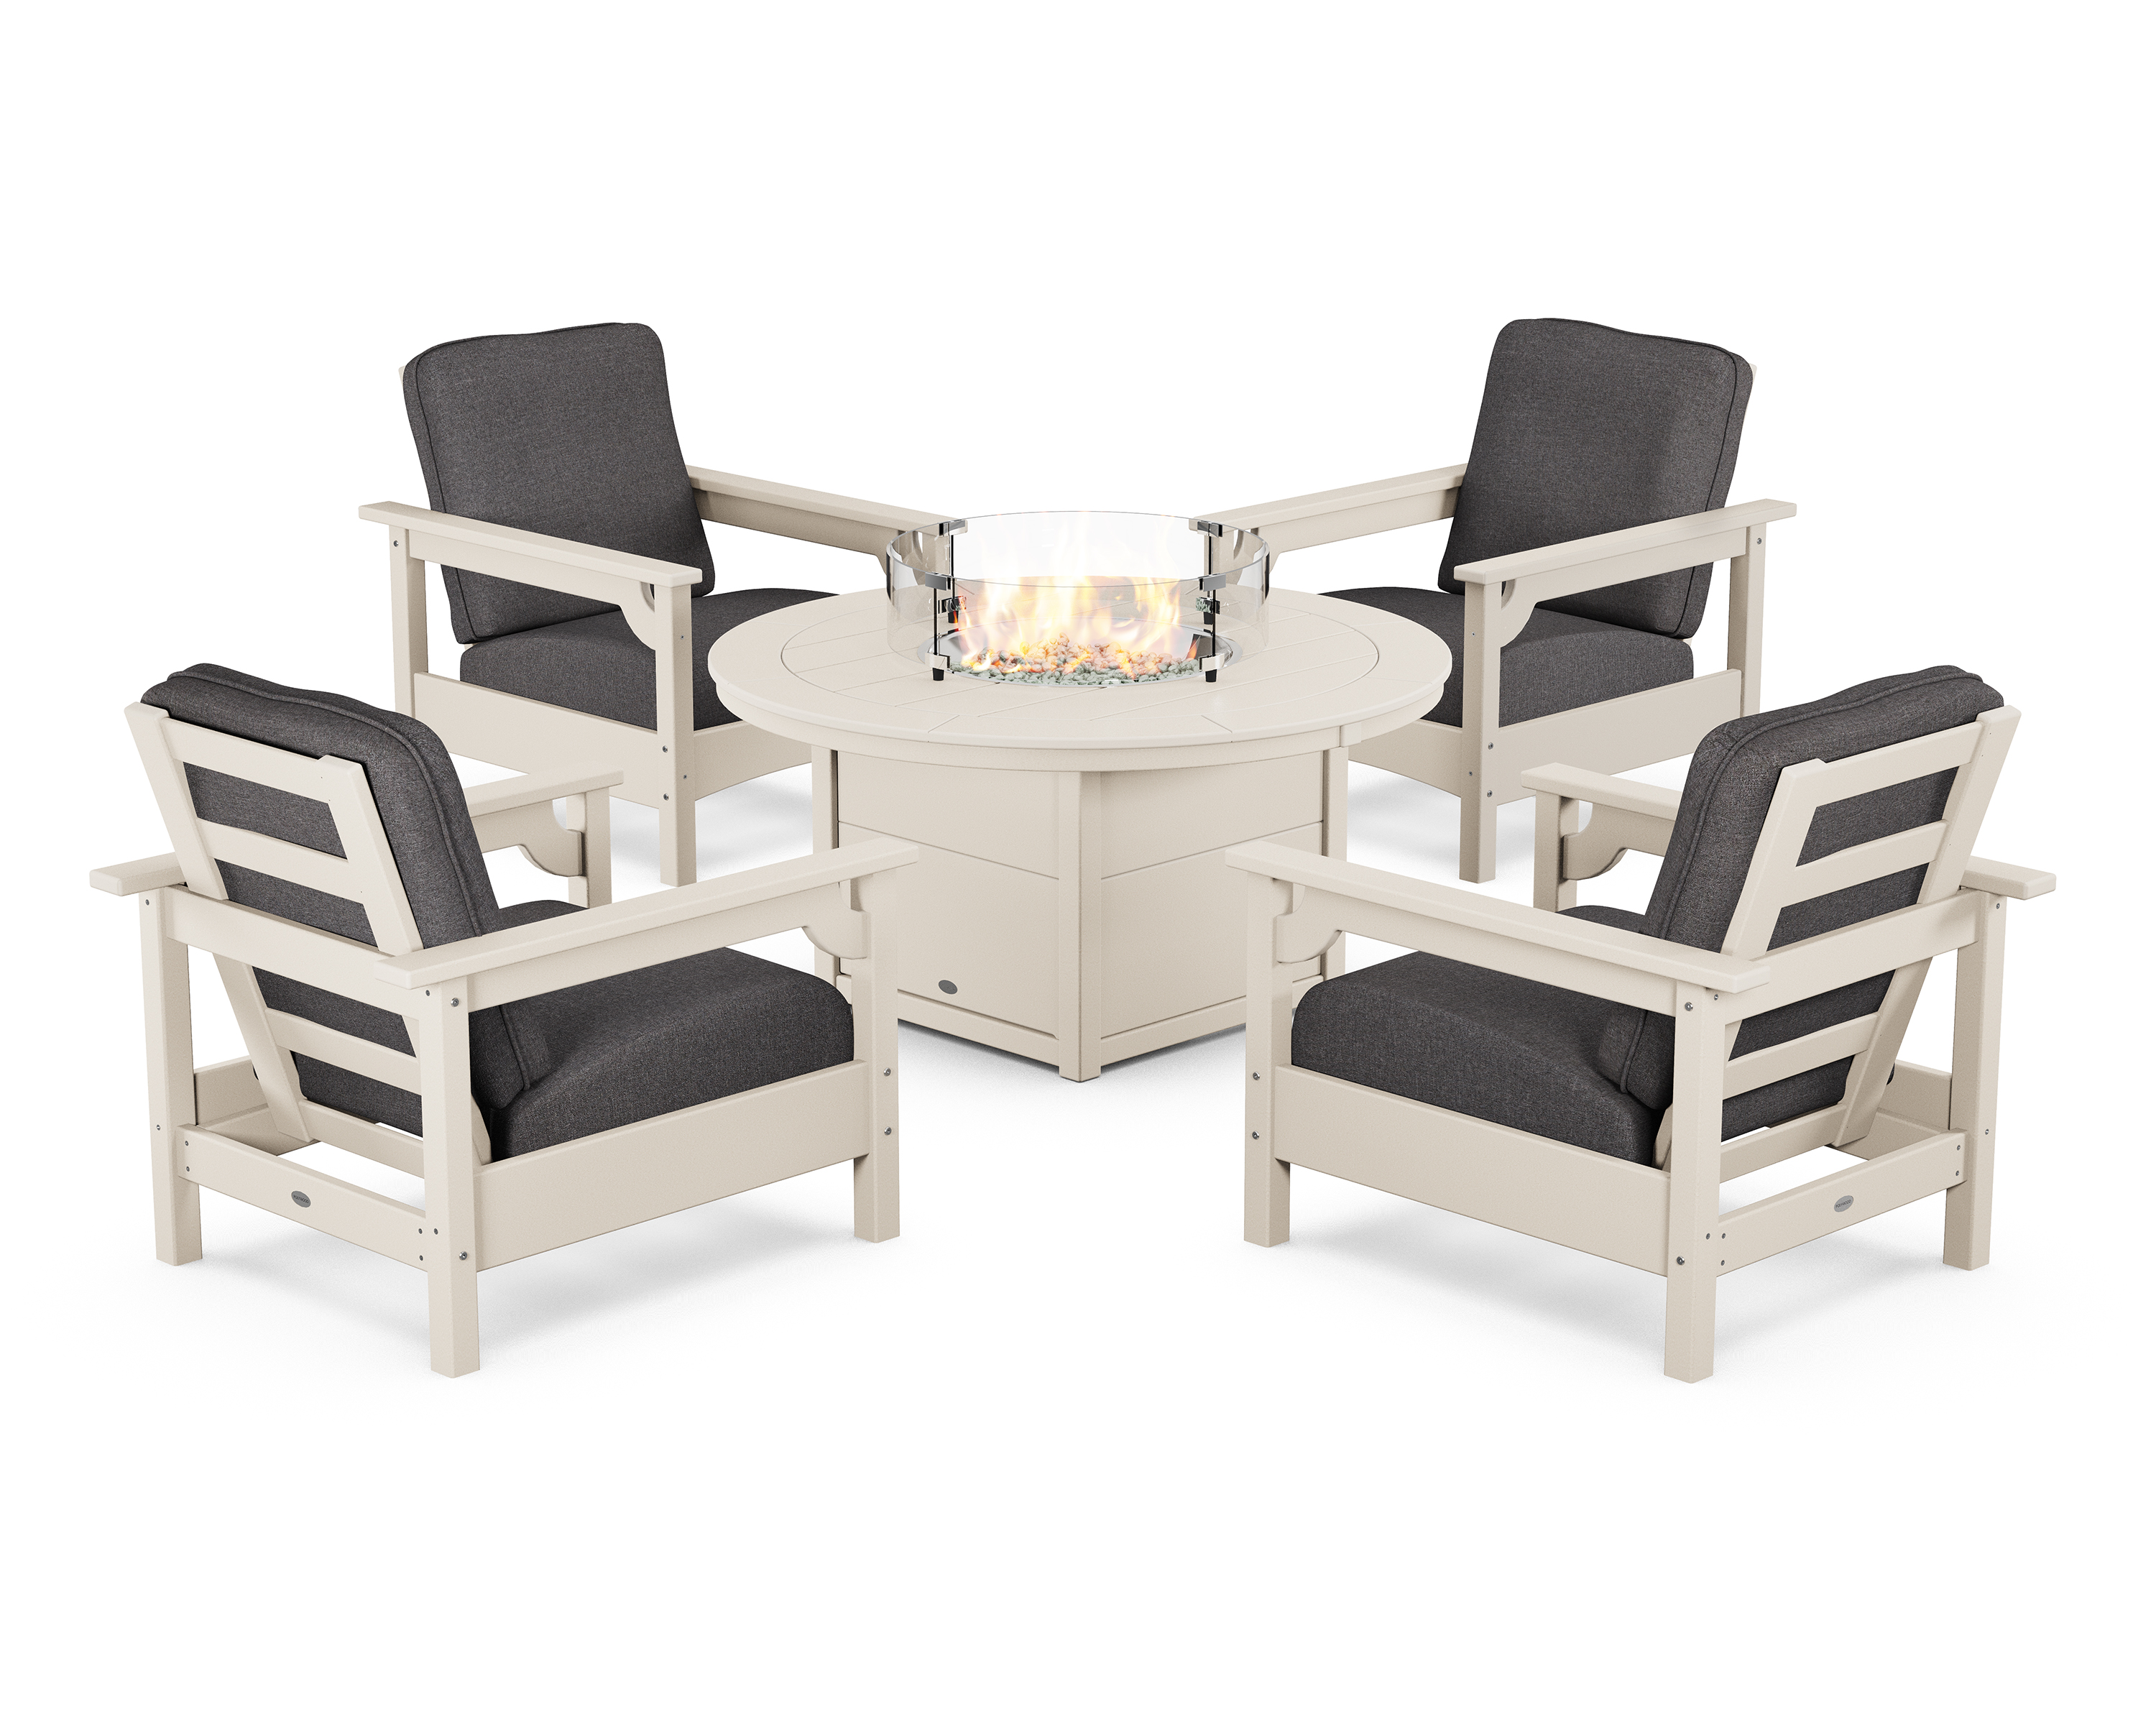 club 5-piece conversation set with fire pit table in sand / ash charcoal product image